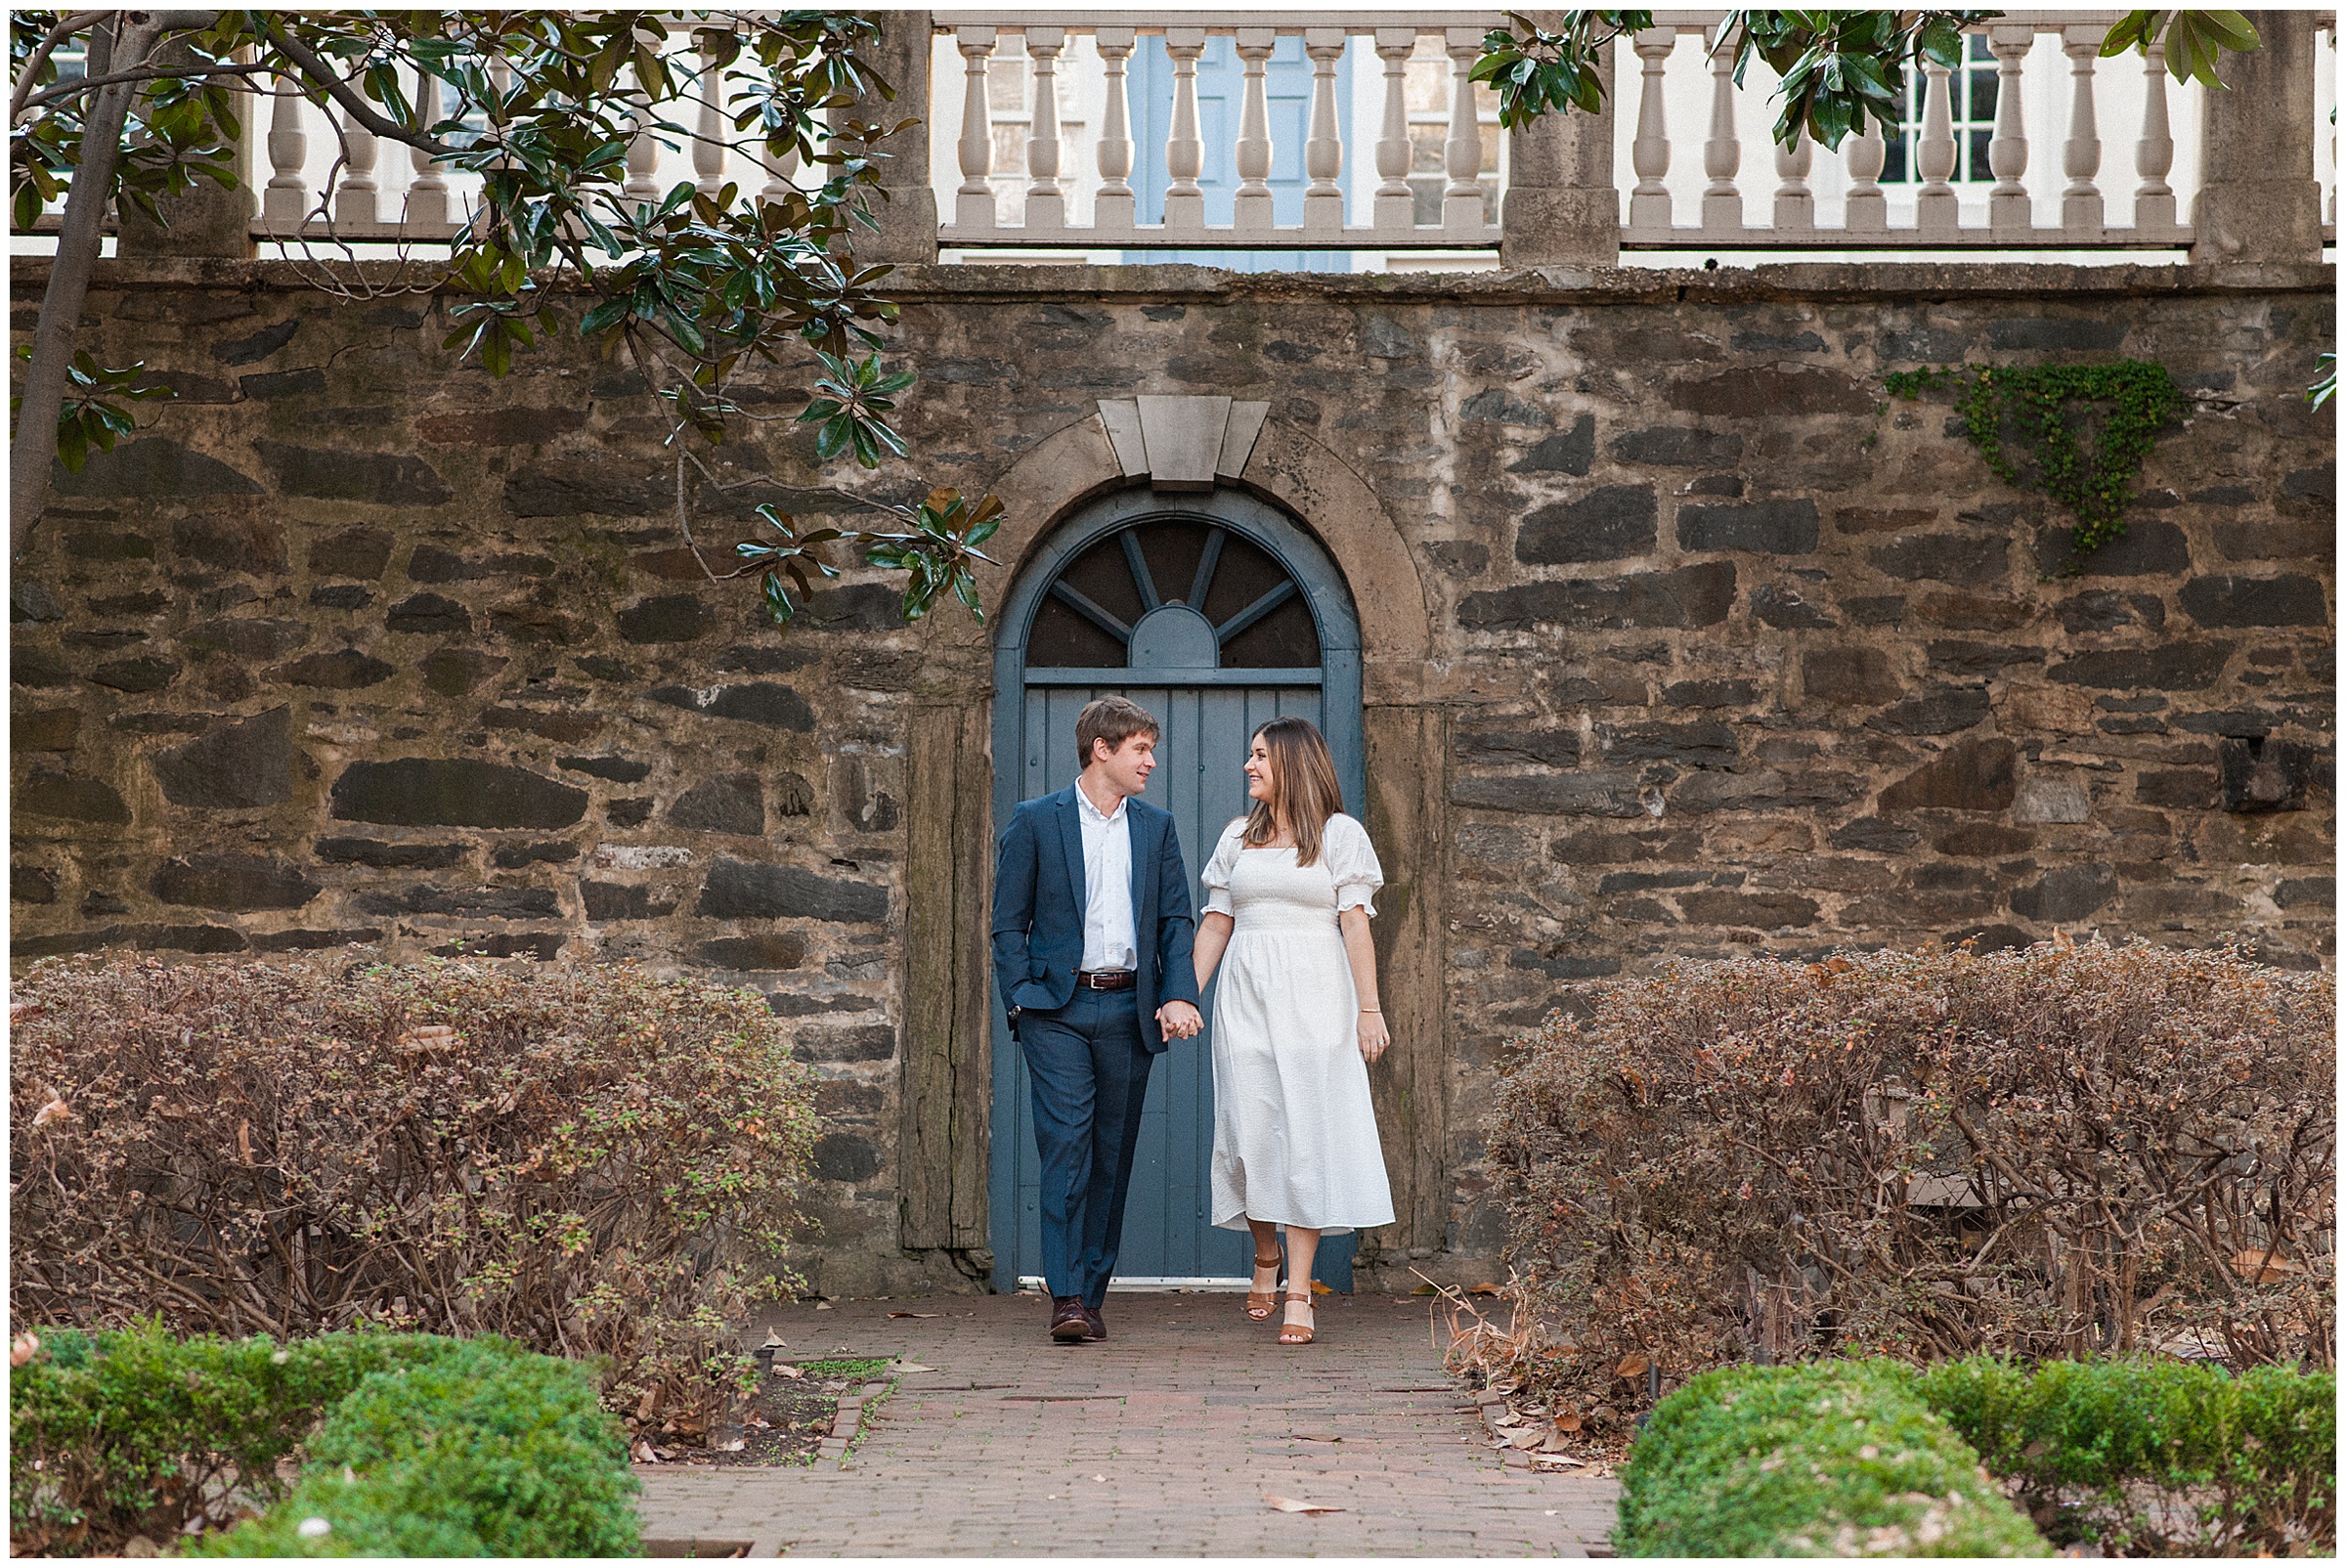 Carlyle House engagement session Alexandria, Virginia